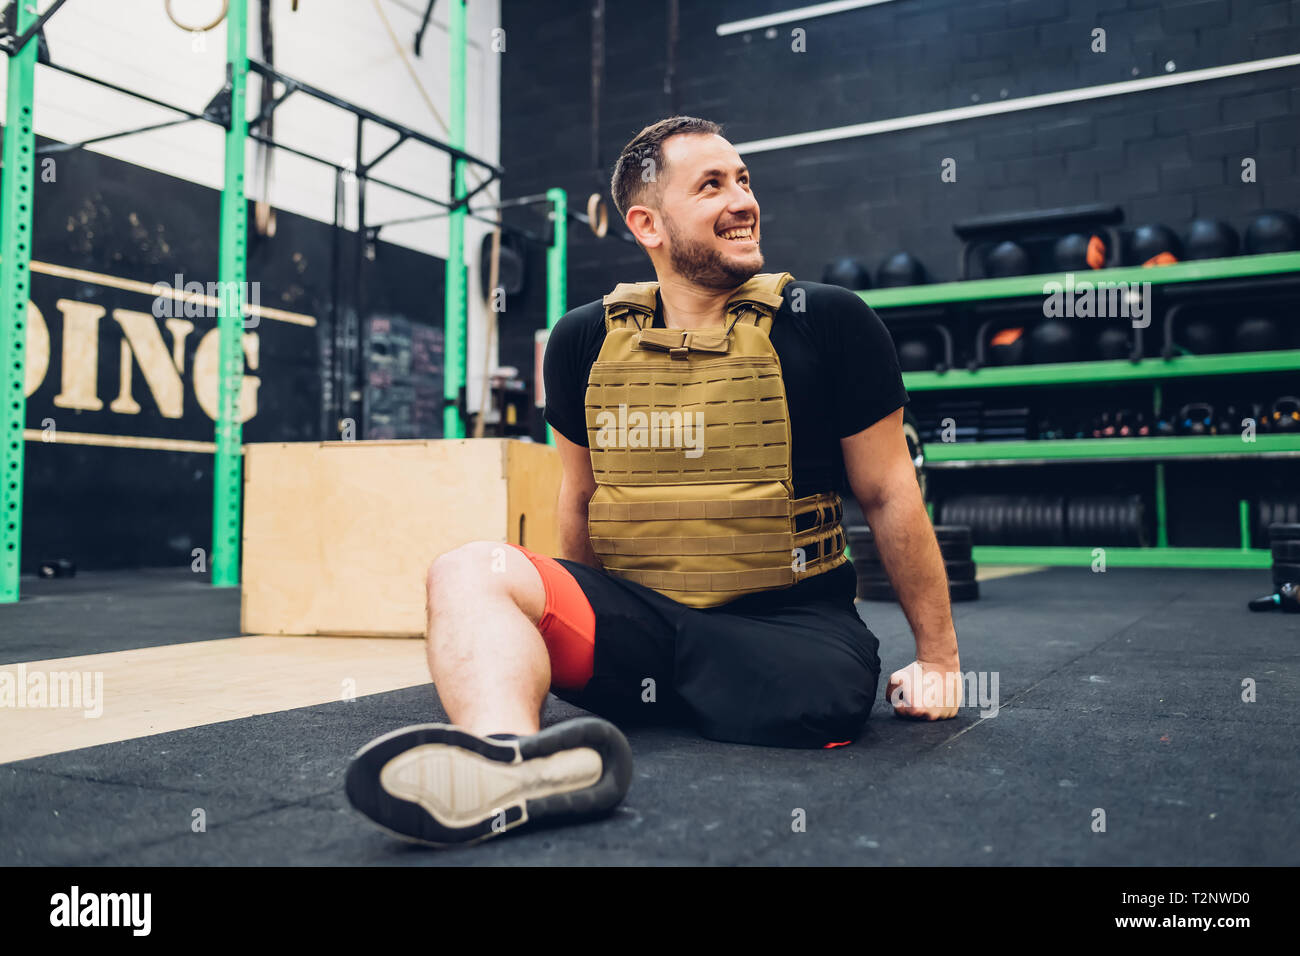 Man with disability sitting on gym floor smiling Stock Photo